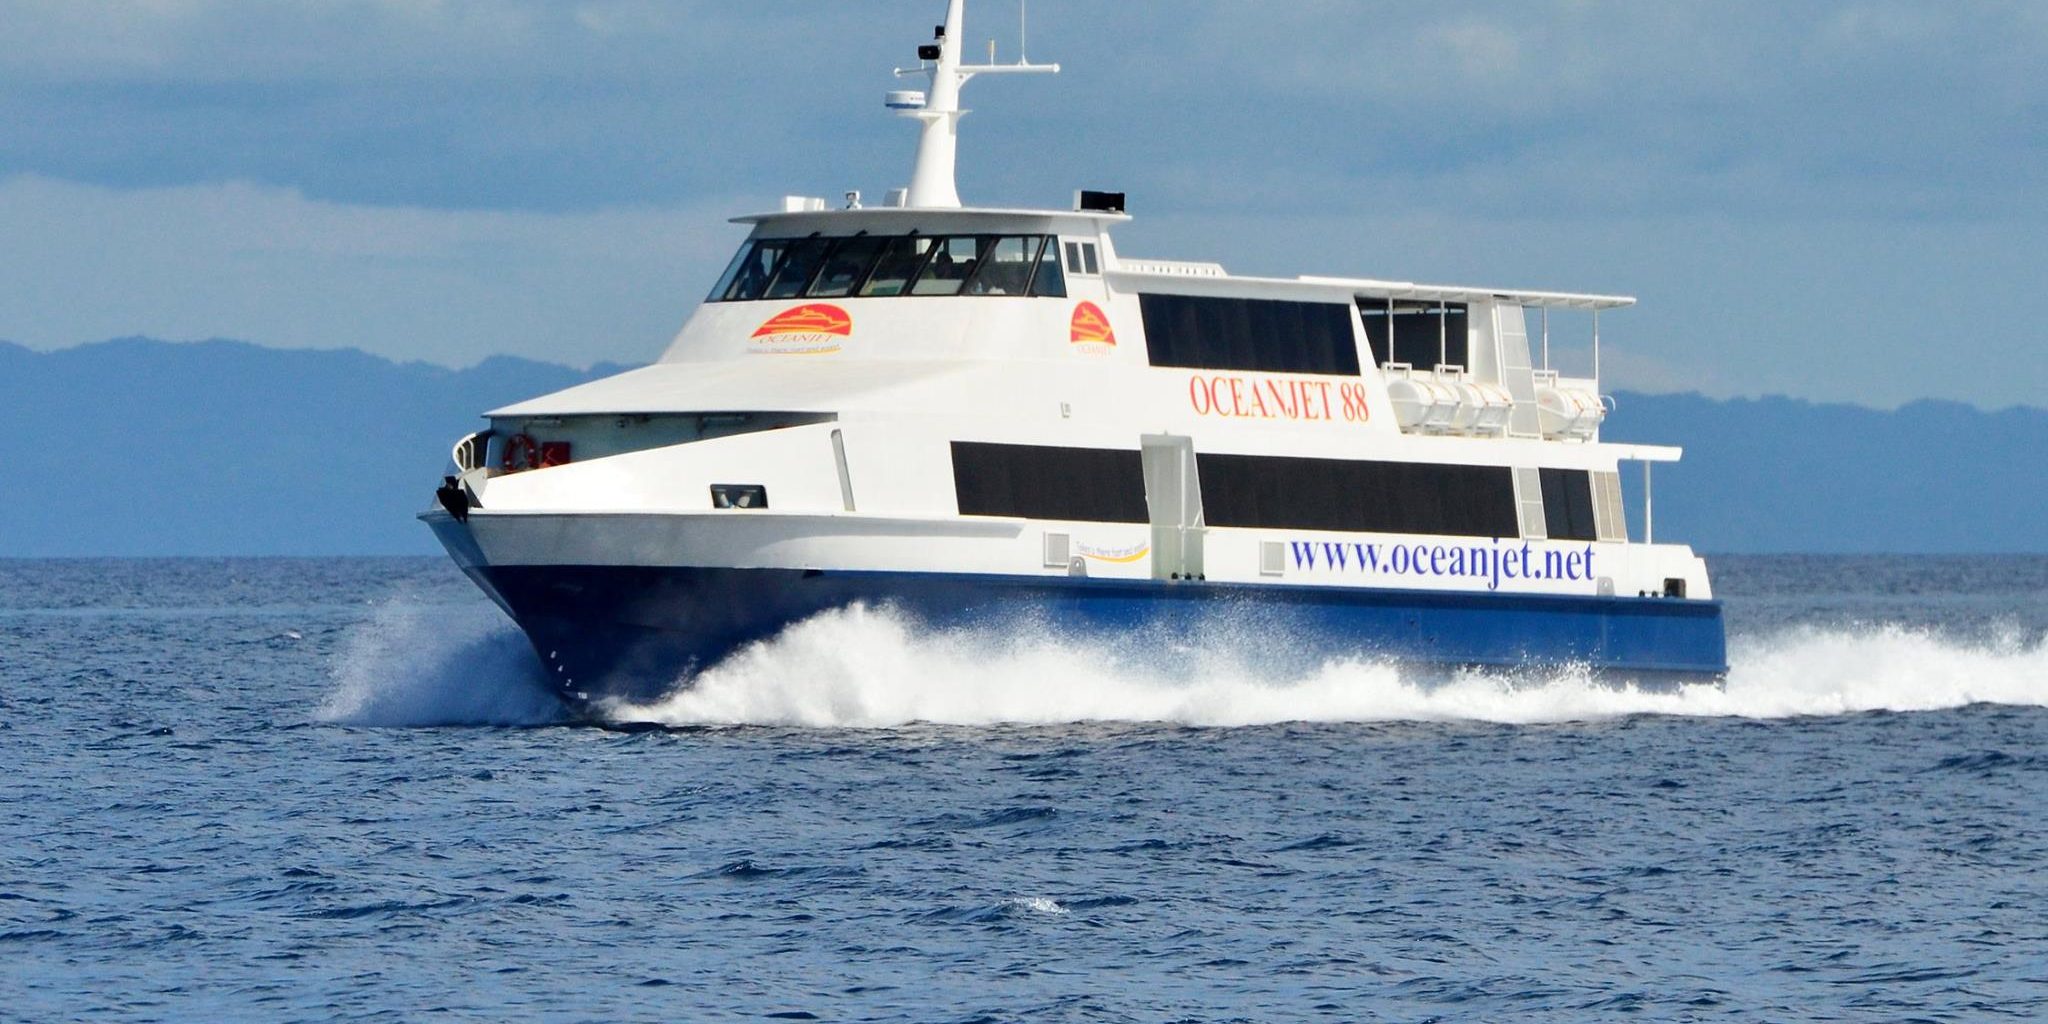 Calapan to Batangas schedule and vessel